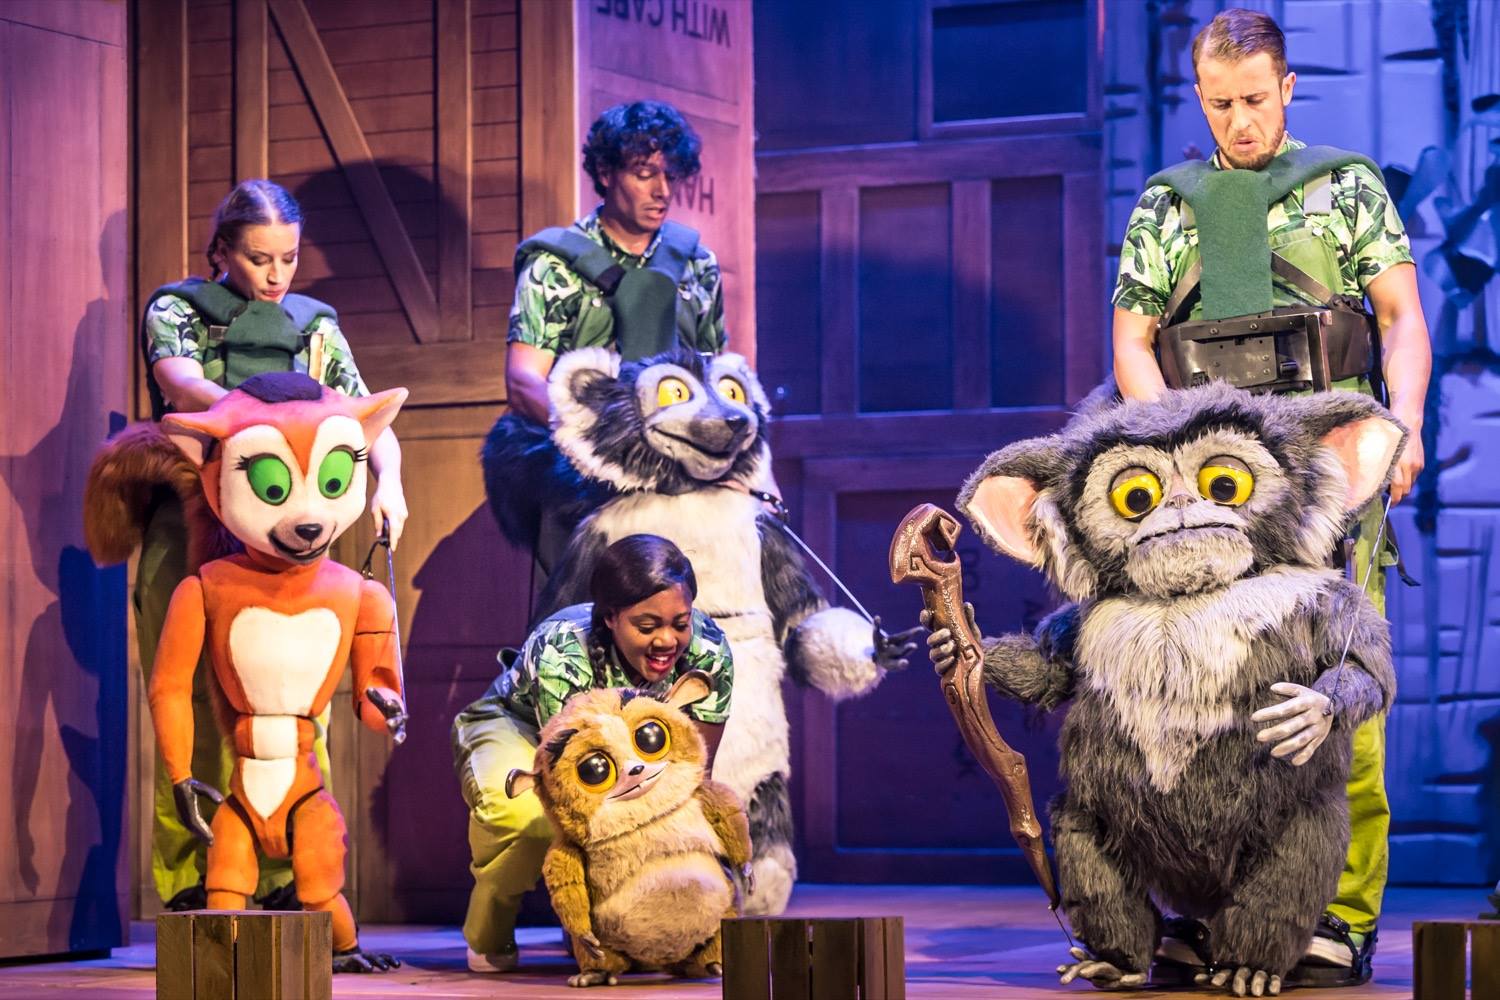 Madagascar The Musical at The Hippodrome in Bristol